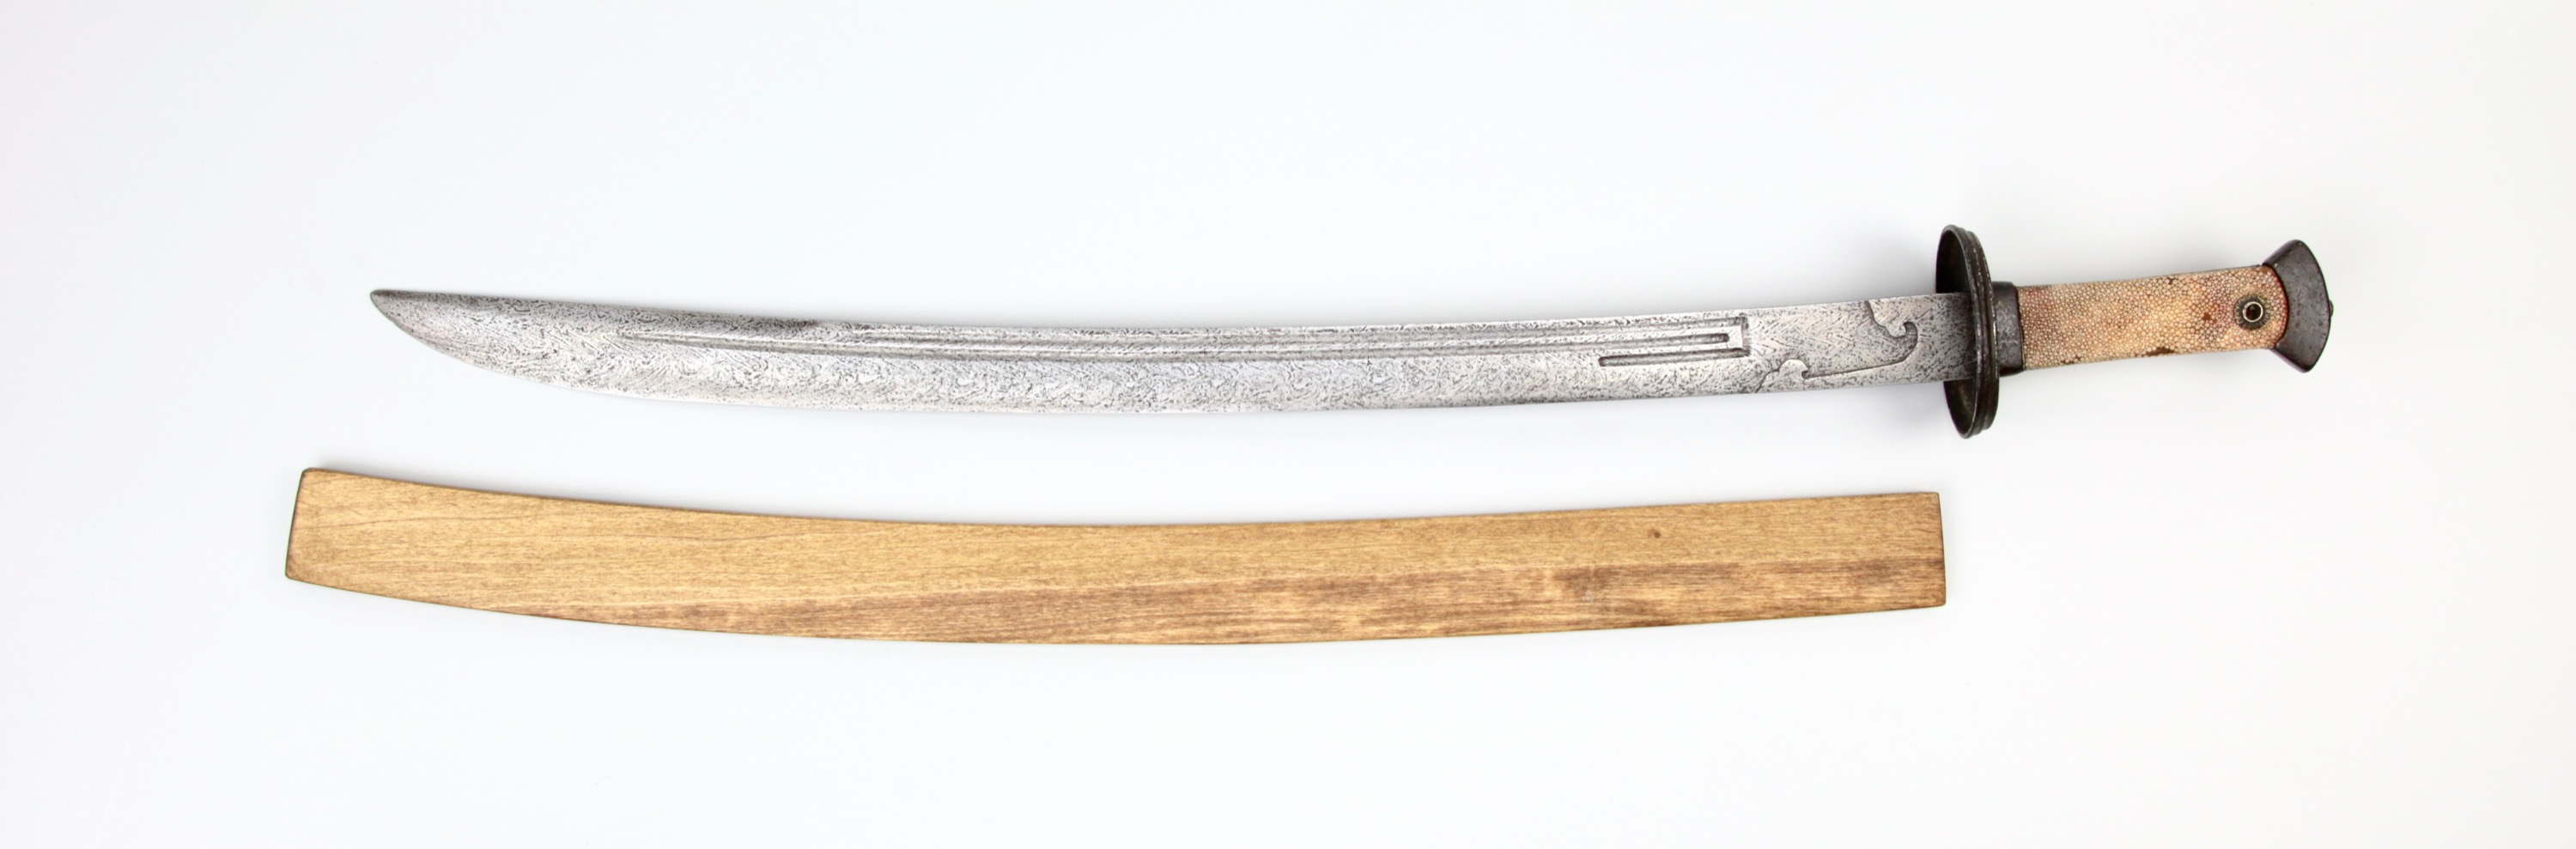 Ray-skin covered hilt and wooden scabbard